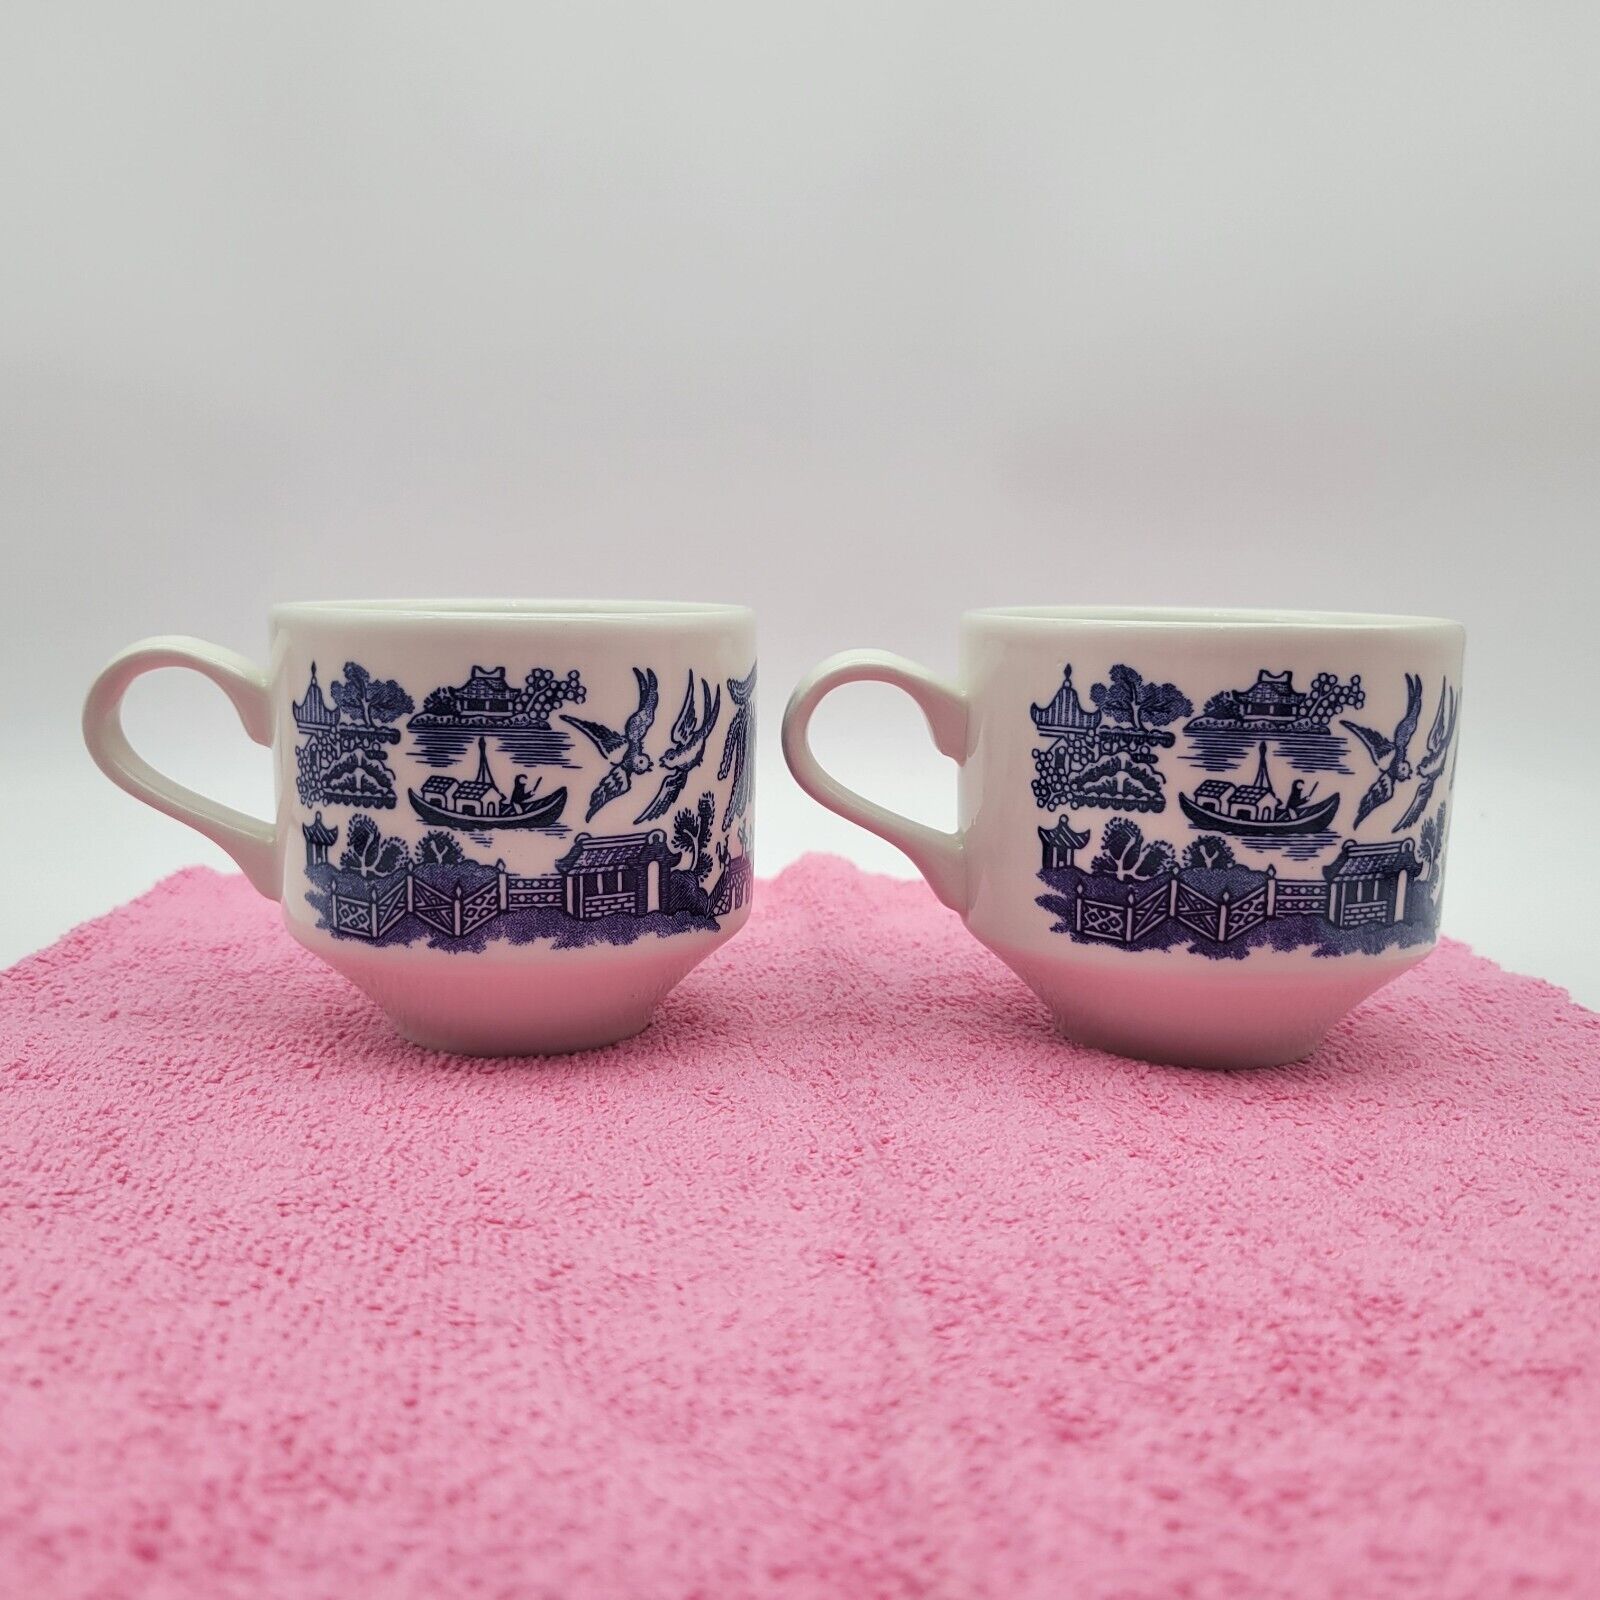 Set of 2 Vintage Churchill Blue Willow China Coffee Tea Cup Mugs Made in England